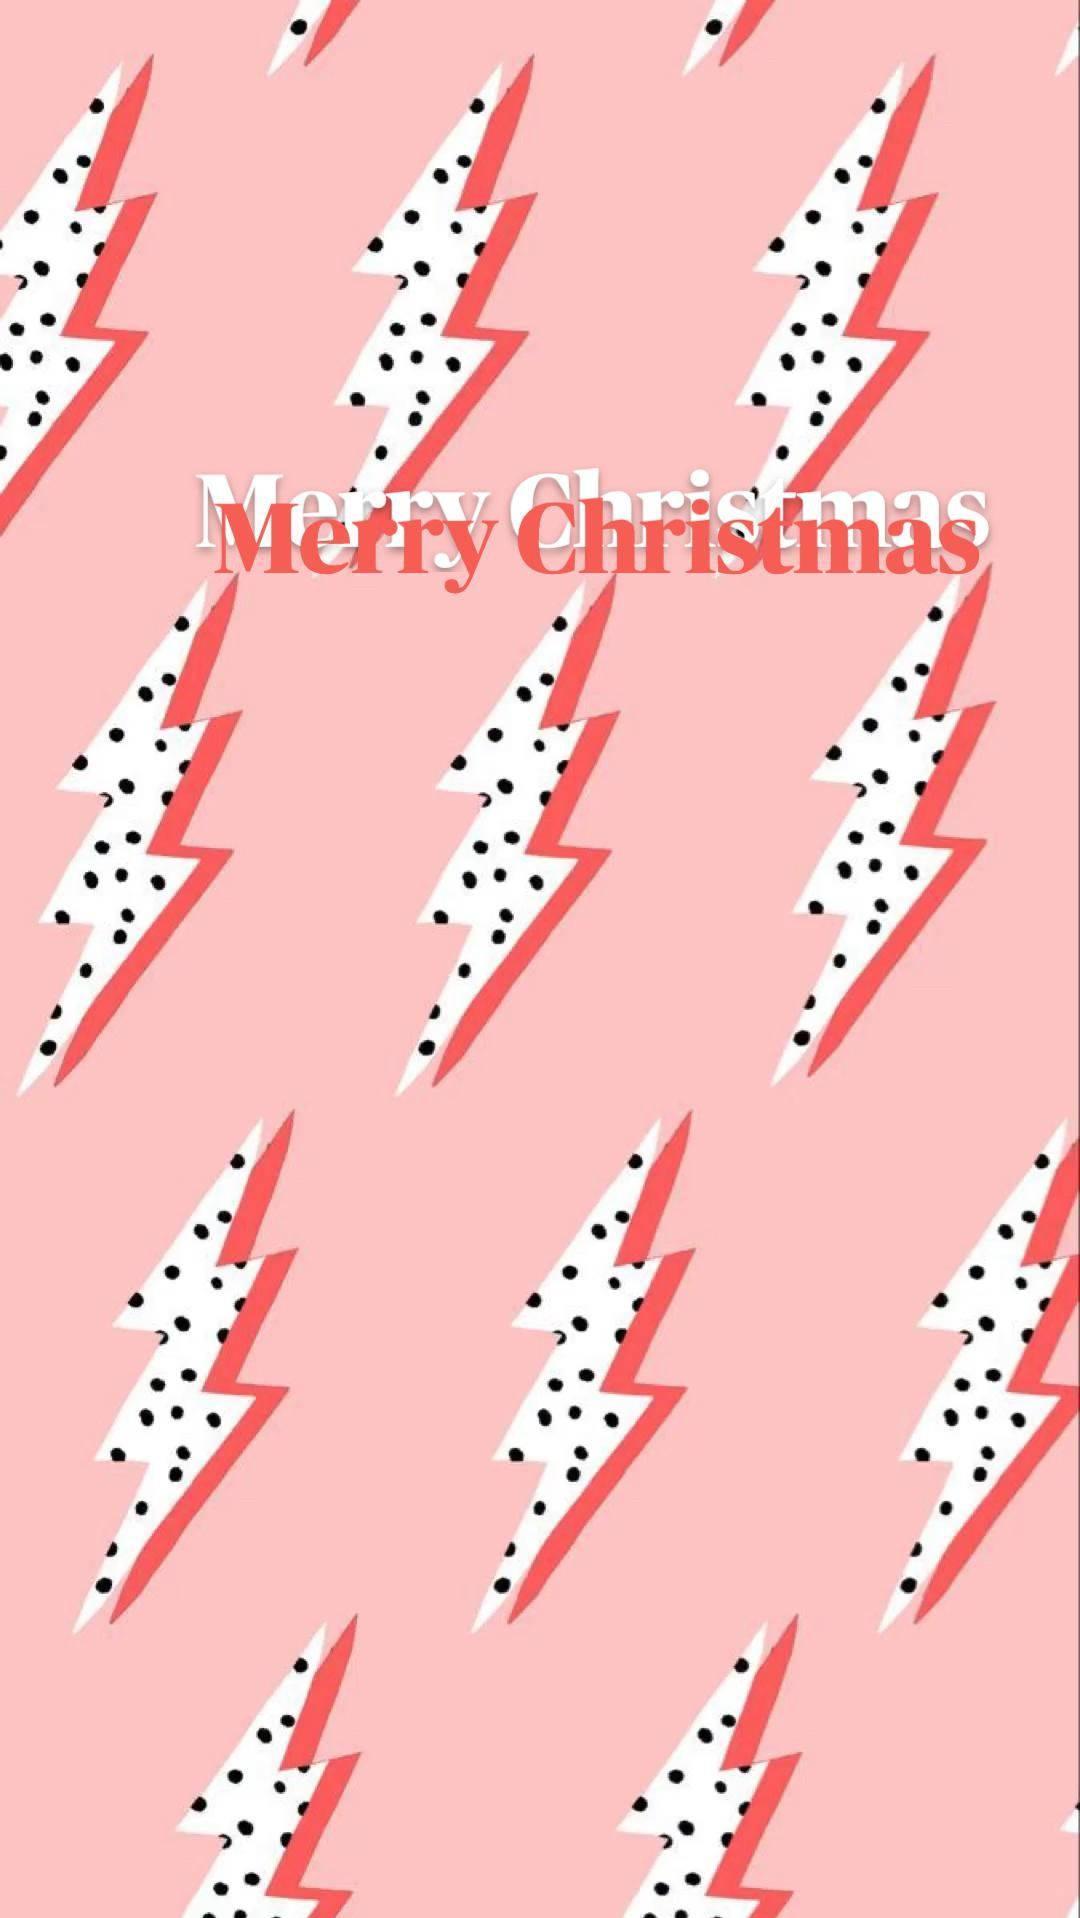 Preppy Christmas Pictures Wallpaper